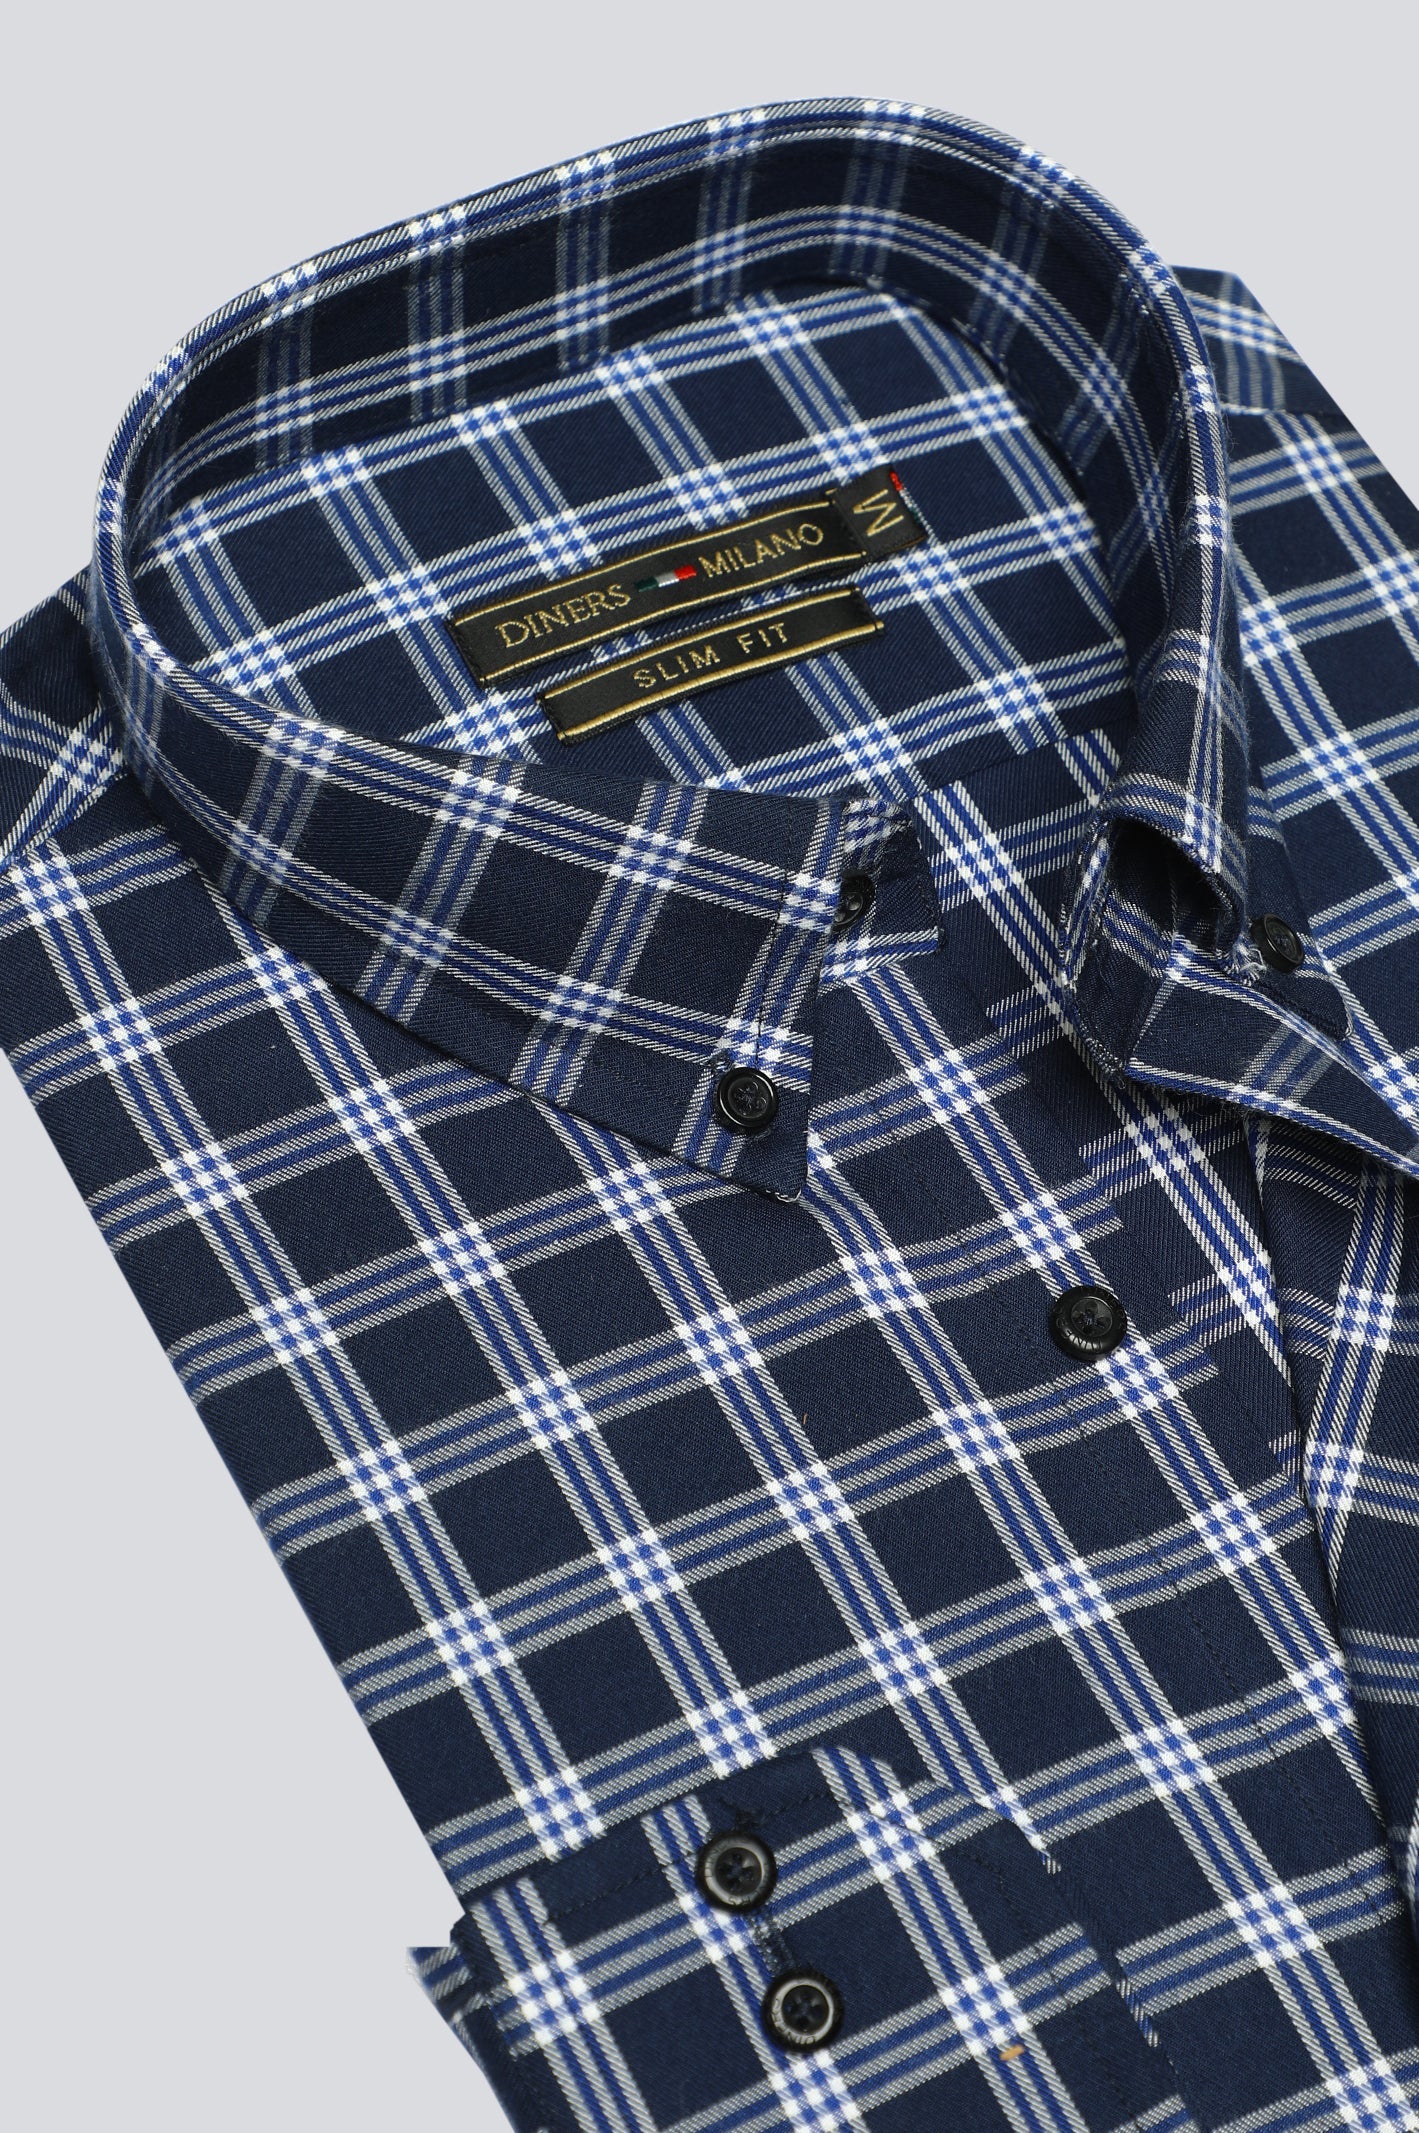 Dark Blue Tattersall Check Casual Milano Shirt for Men - Diners